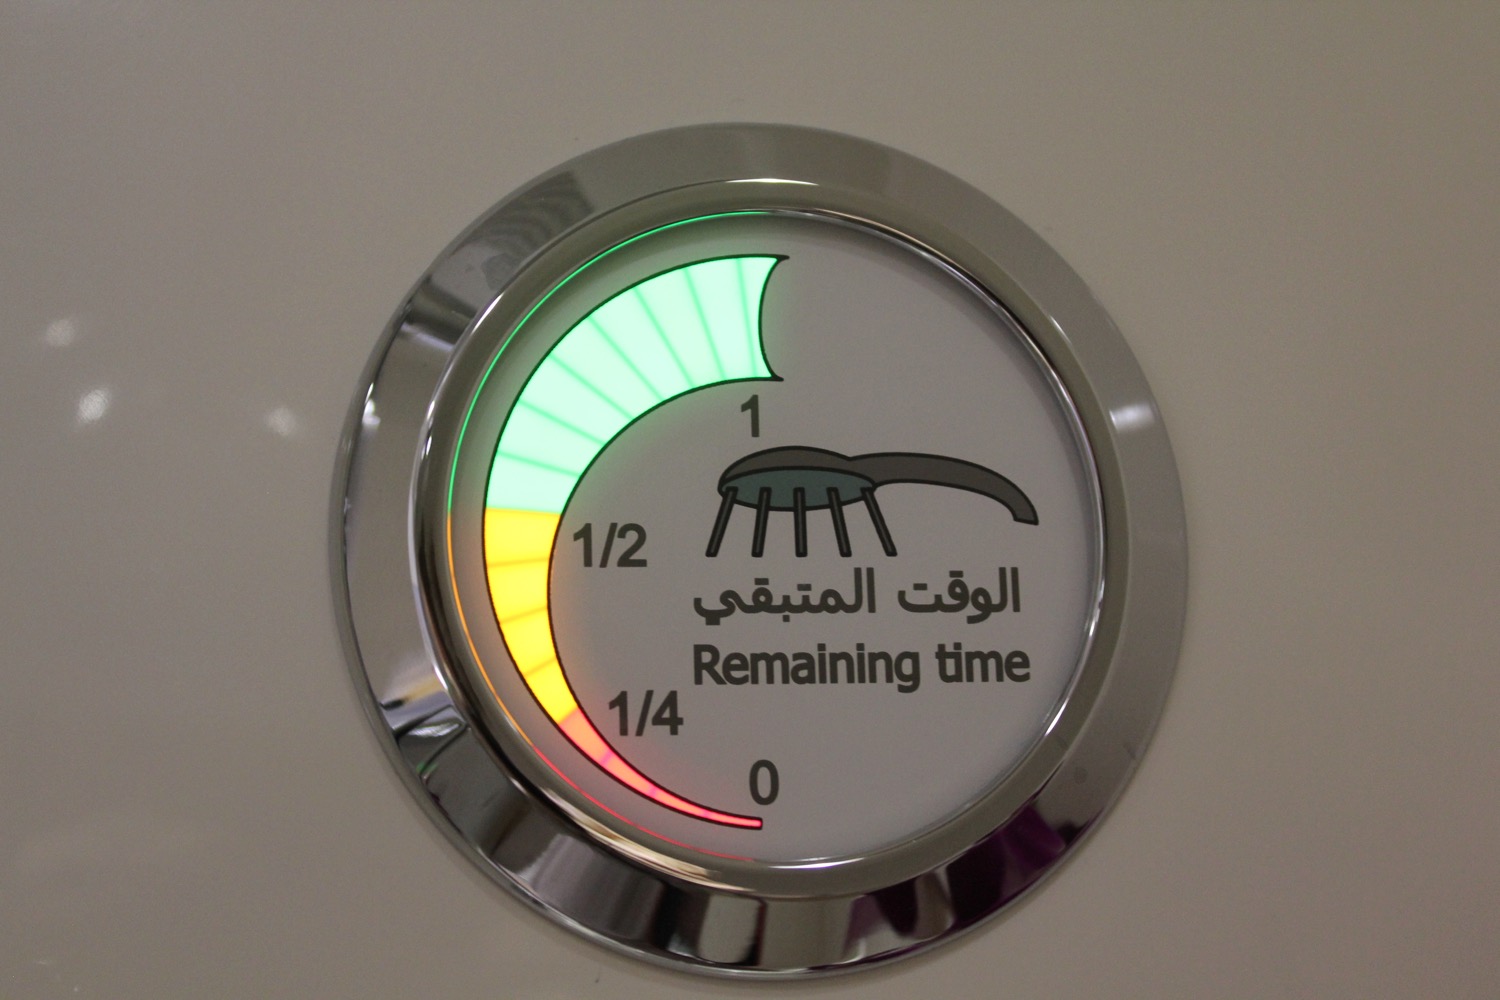 a circular gauge with a green and yellow light